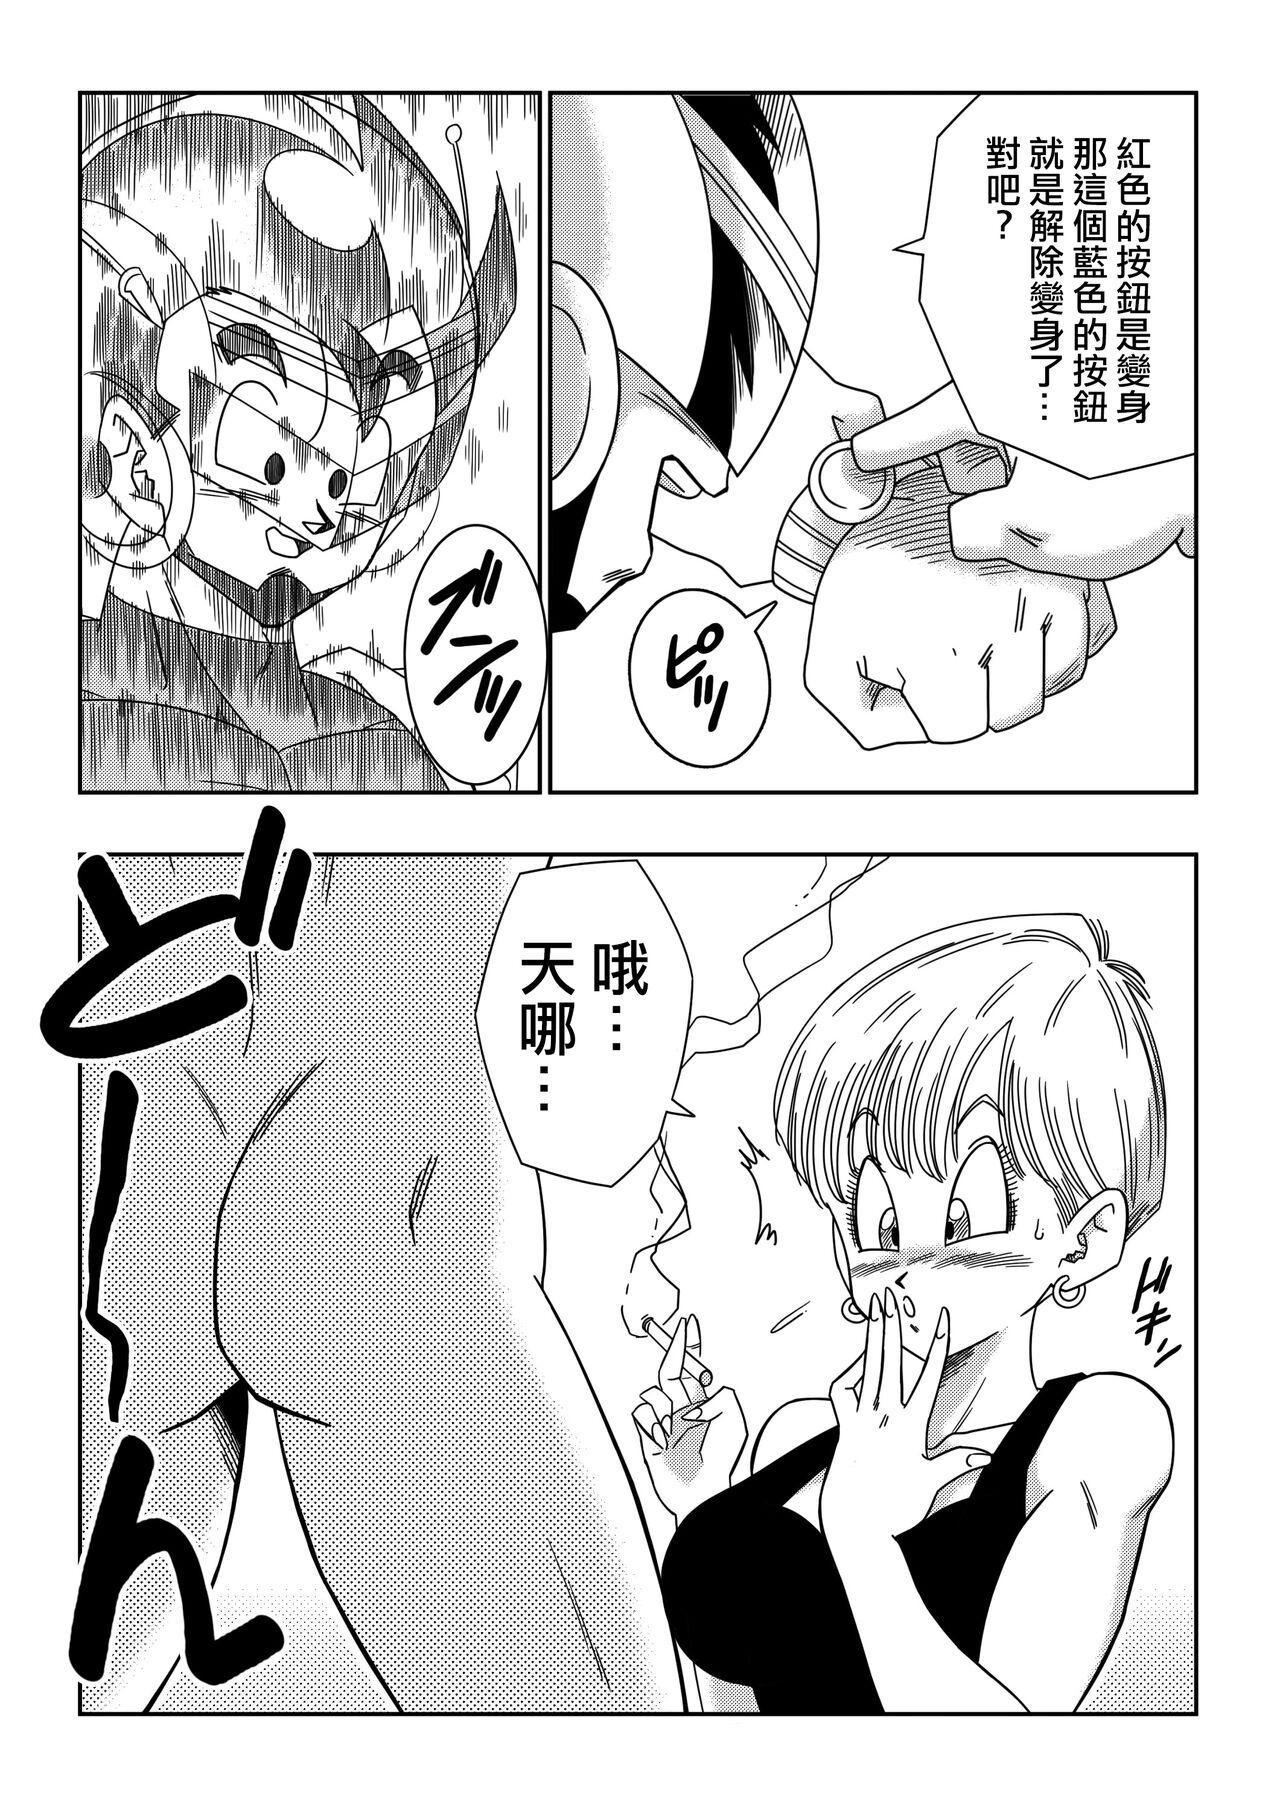 Exhibition LOVE TRIANGLE Z PART 3 - Dragon ball z Groping - Page 3